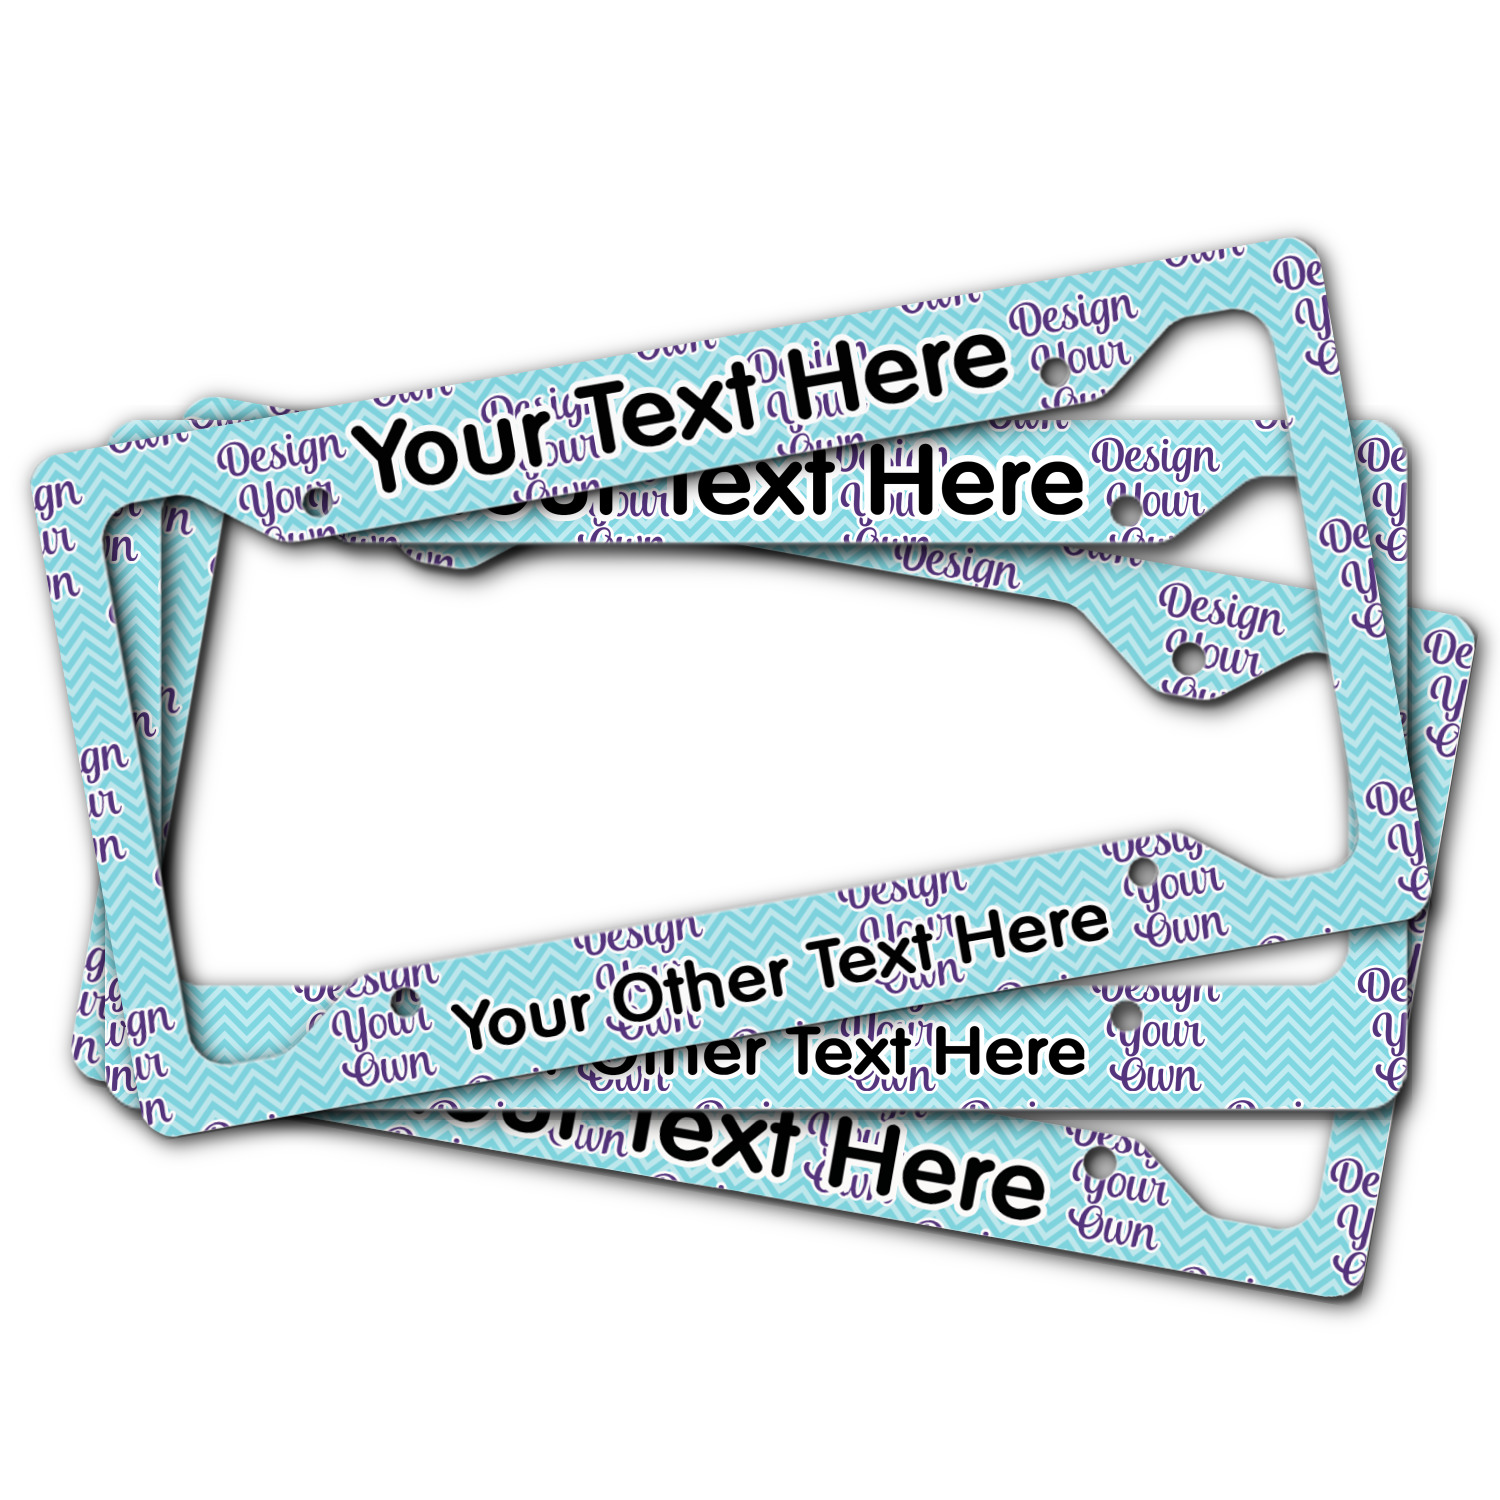 YEX Abstract Id Rather BE Training JIU-Jitsu License Plate Frame Car Licence Plate Covers Auto Tag Holder 6 x 12